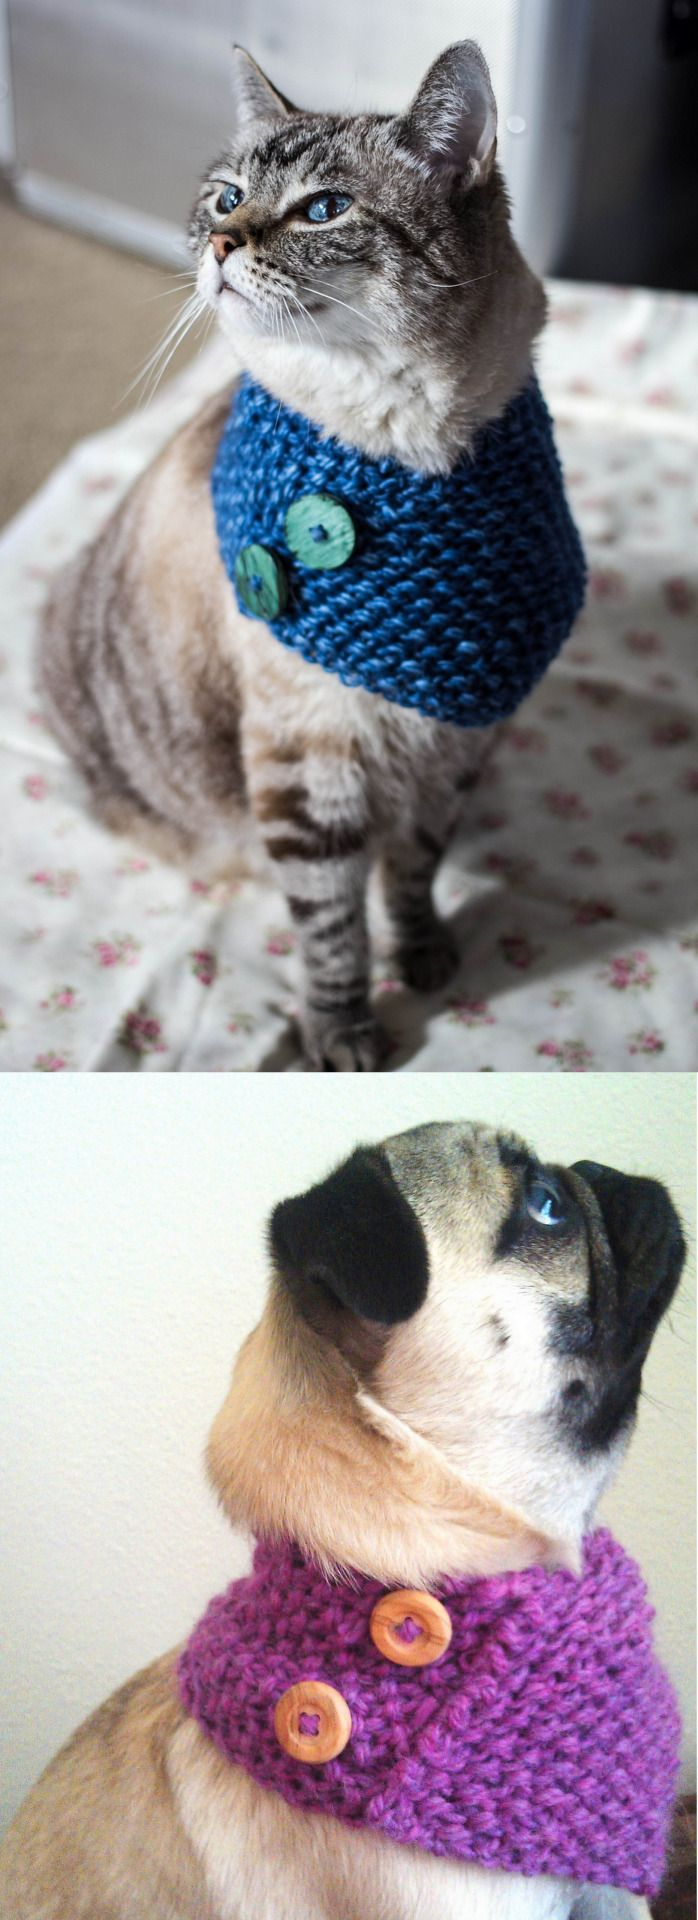 Small Dog Knitting Patterns Knitting Patterns Cowl Diy Knit Cowl Free Pattern For Cats And Small